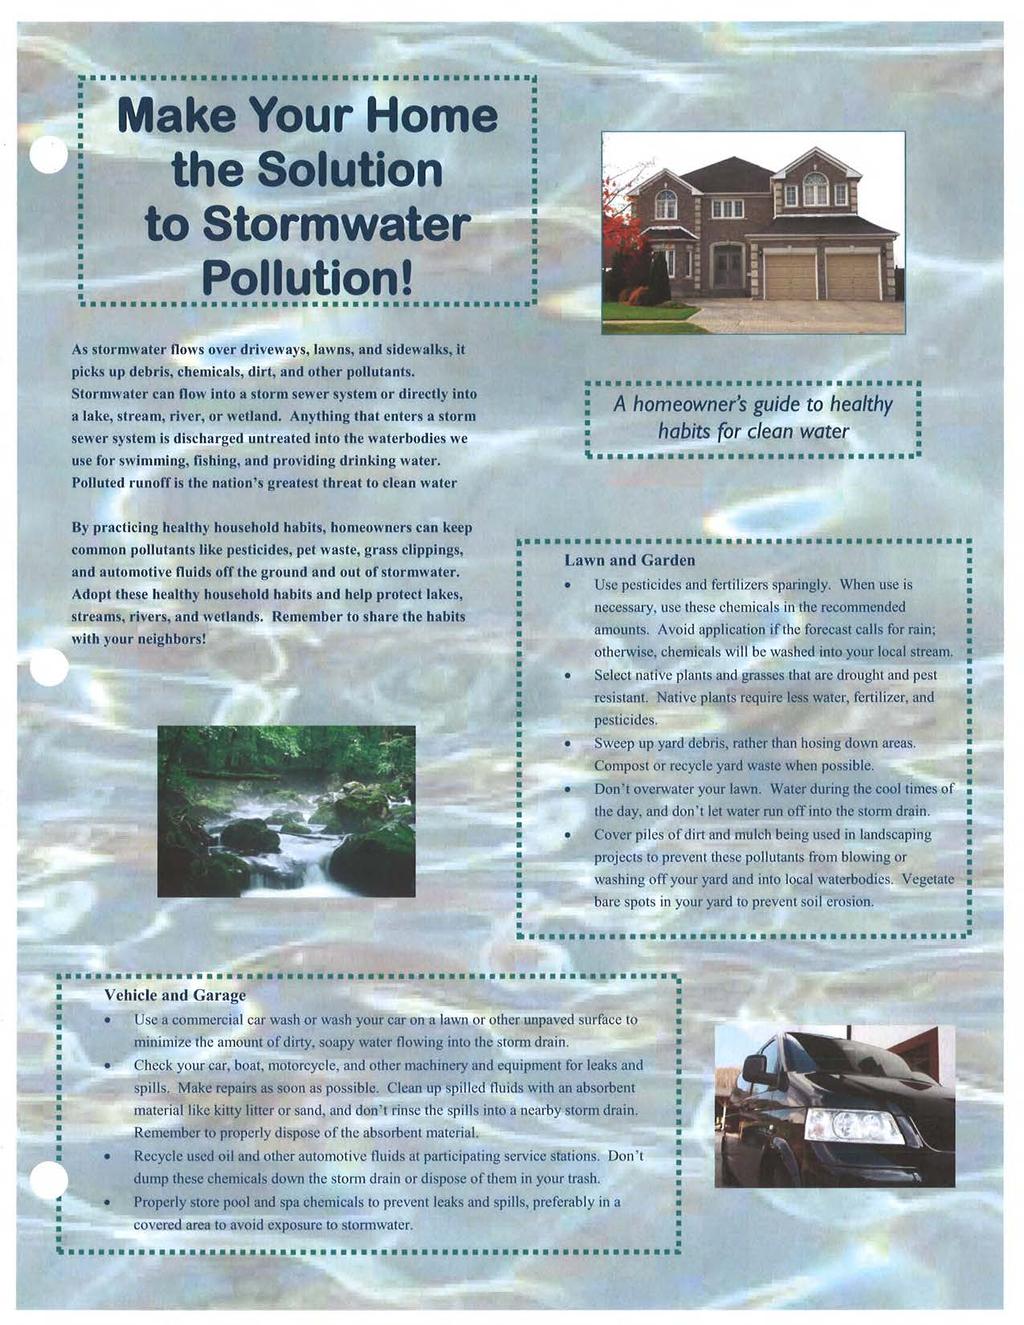 Make Your Home the Solution to Stormwater : Pollution! As stormwater flows over driveways, lawns, and sidewalks, it picks up debris, chemicals, dirt, and other pollutants.